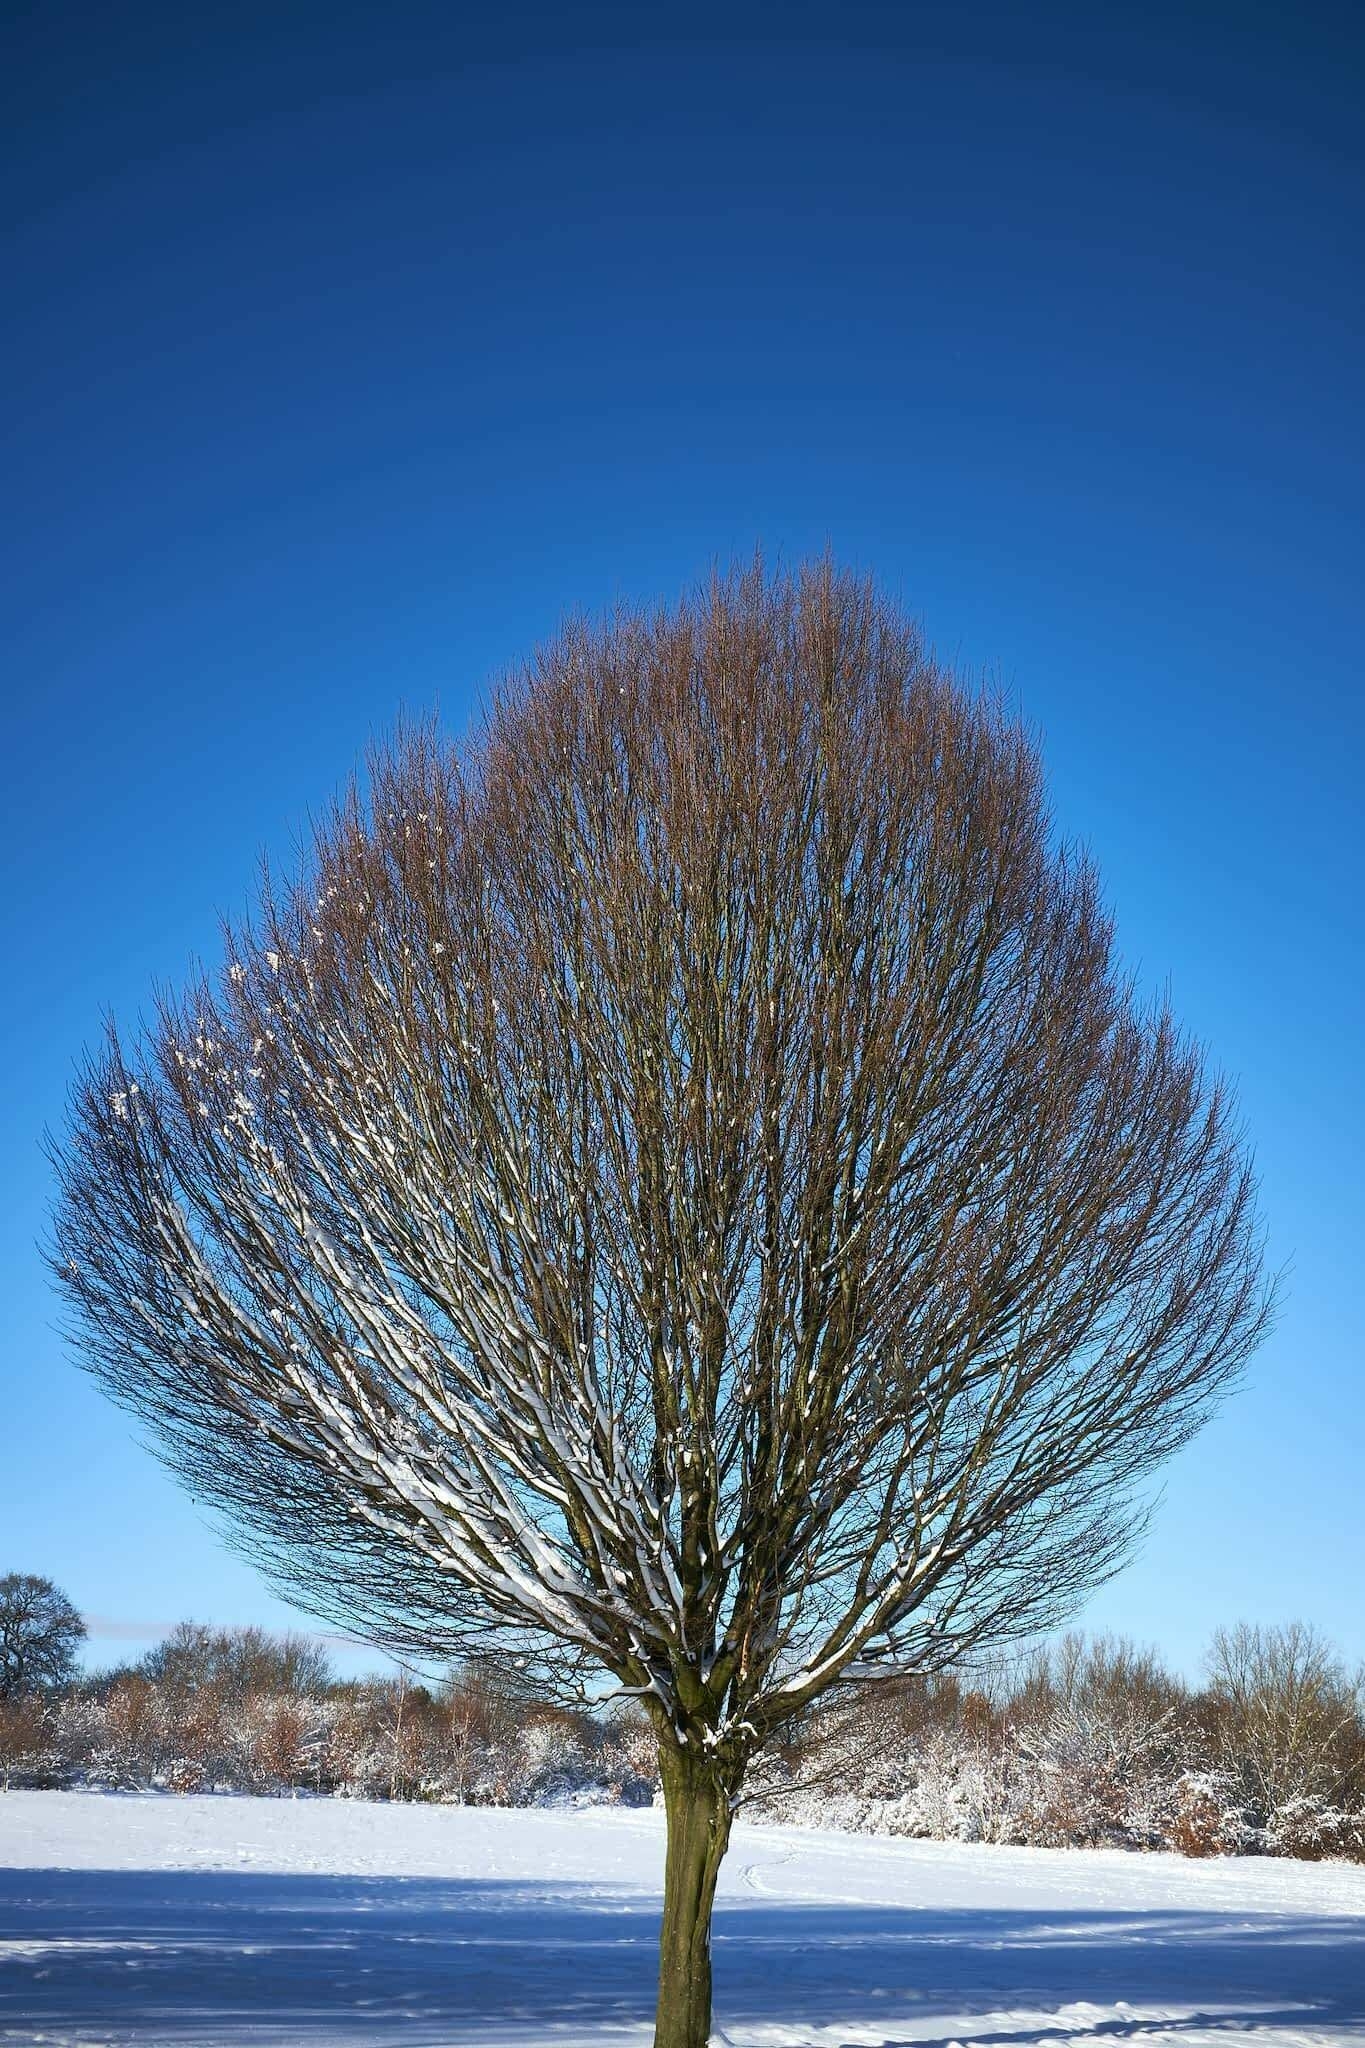 A beautifully shaped hornbeam tree in a snowy park, with a deep blue sky above it.